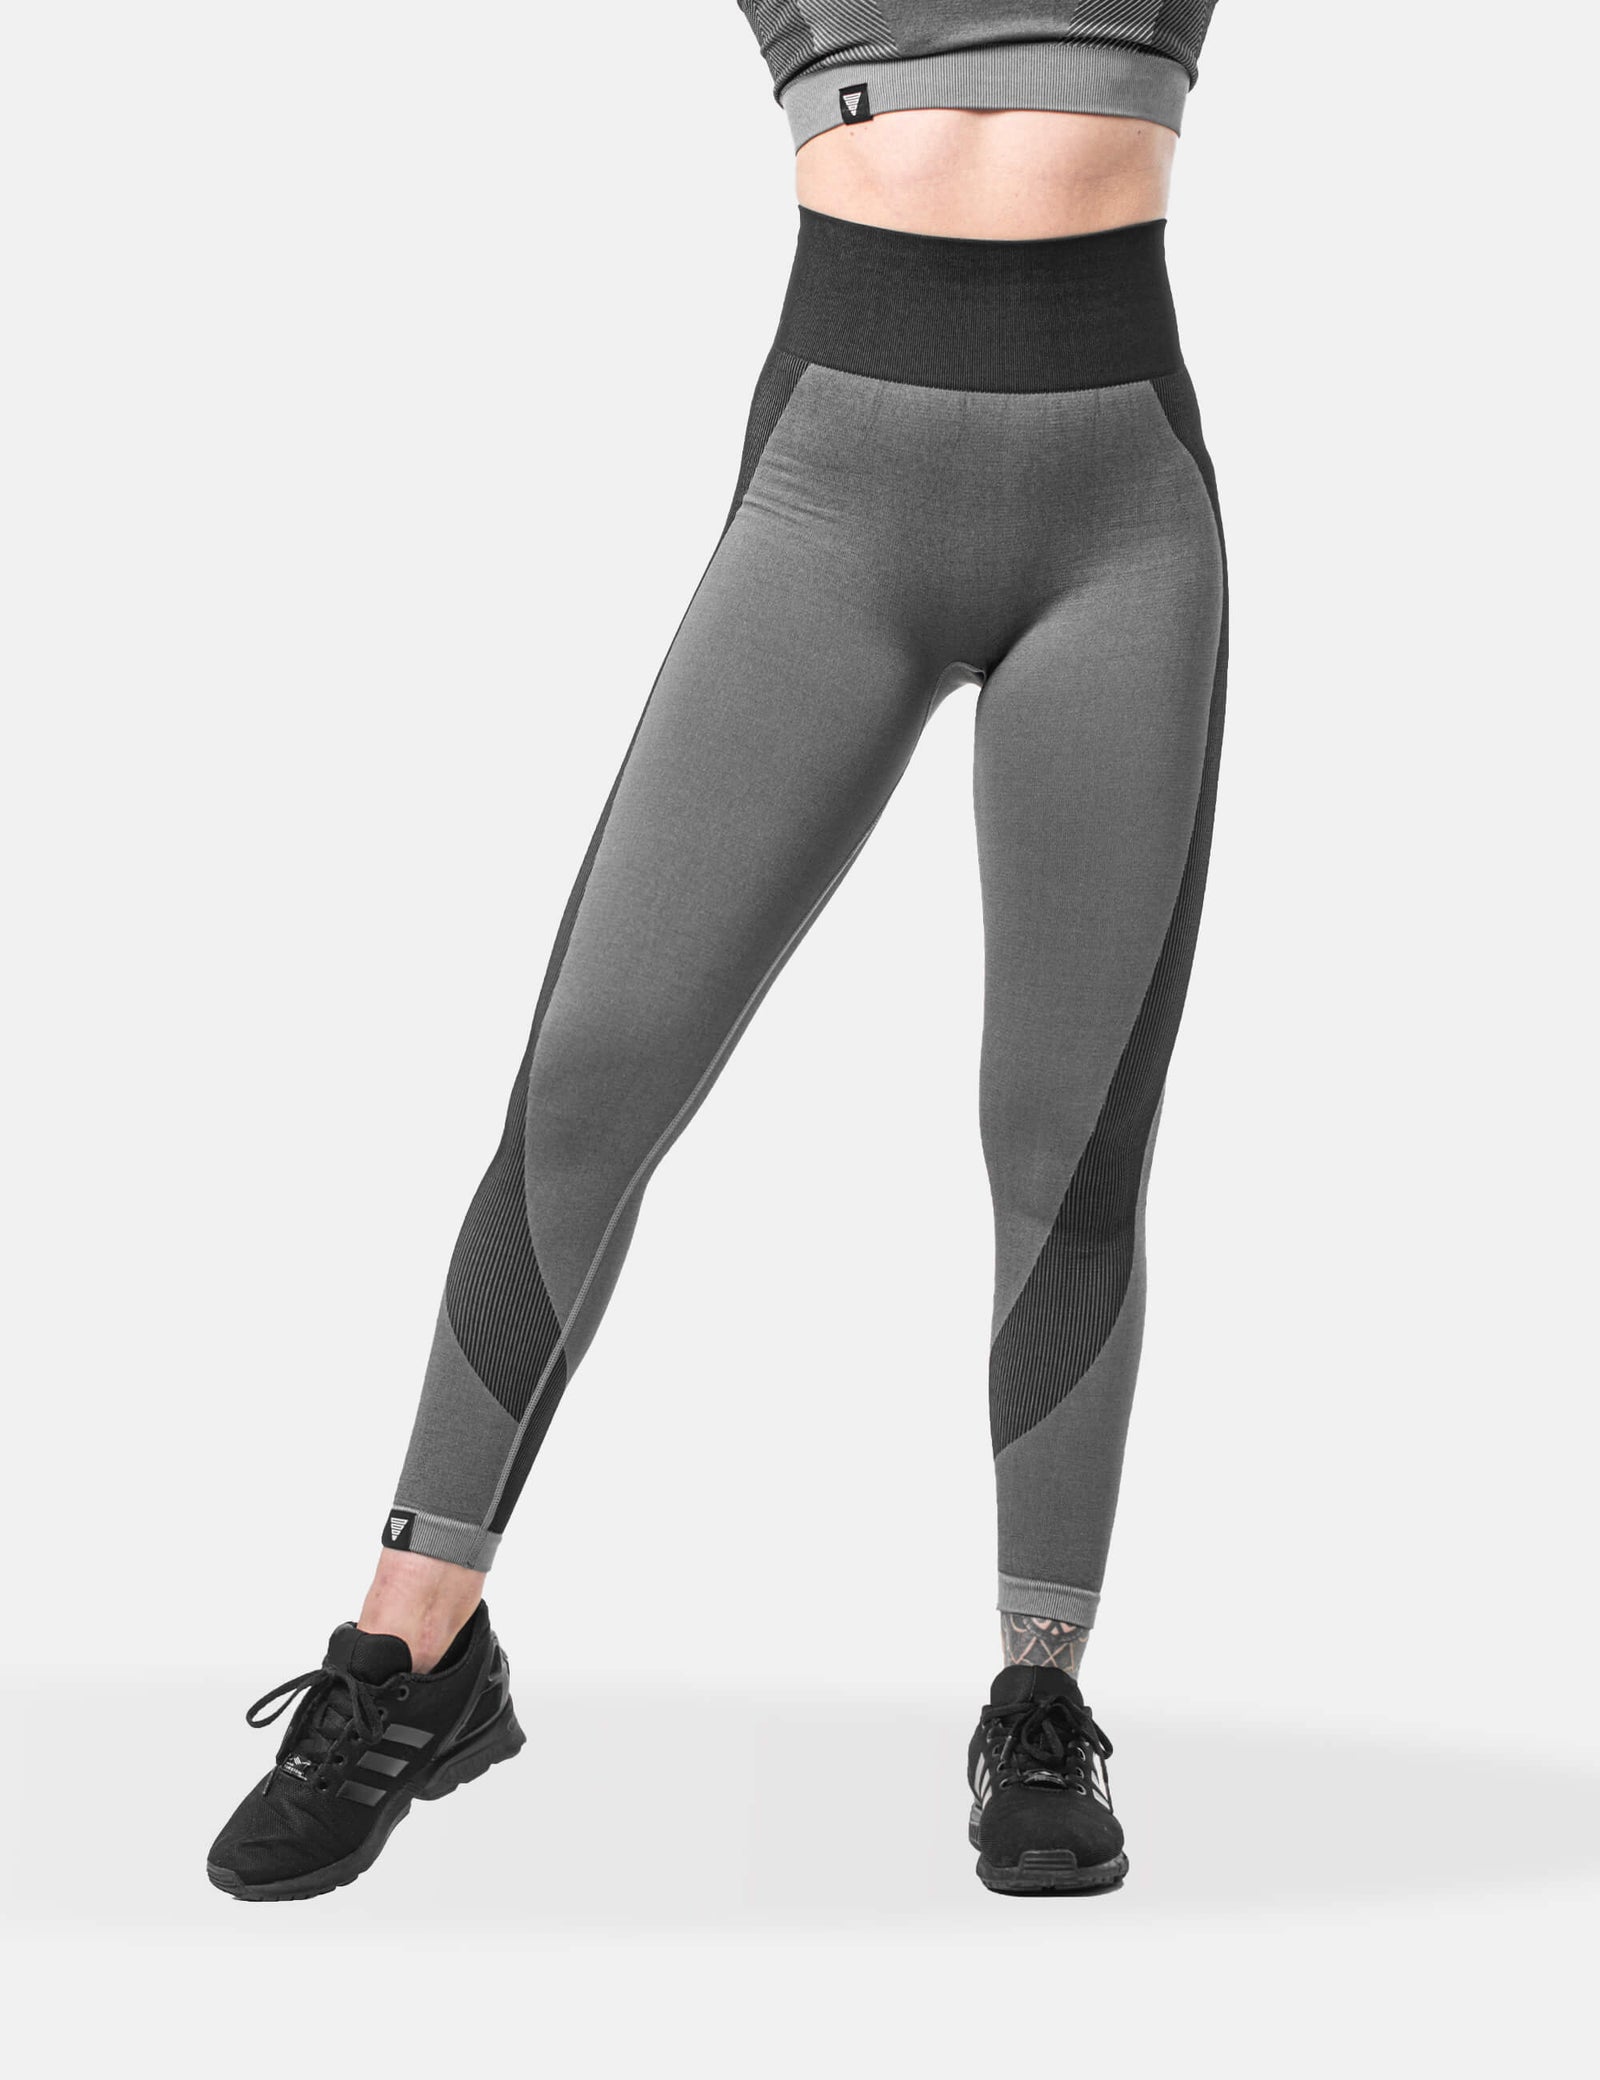 WOMEN: Clothing for your Calisthenics and Street Workout | GORNATION